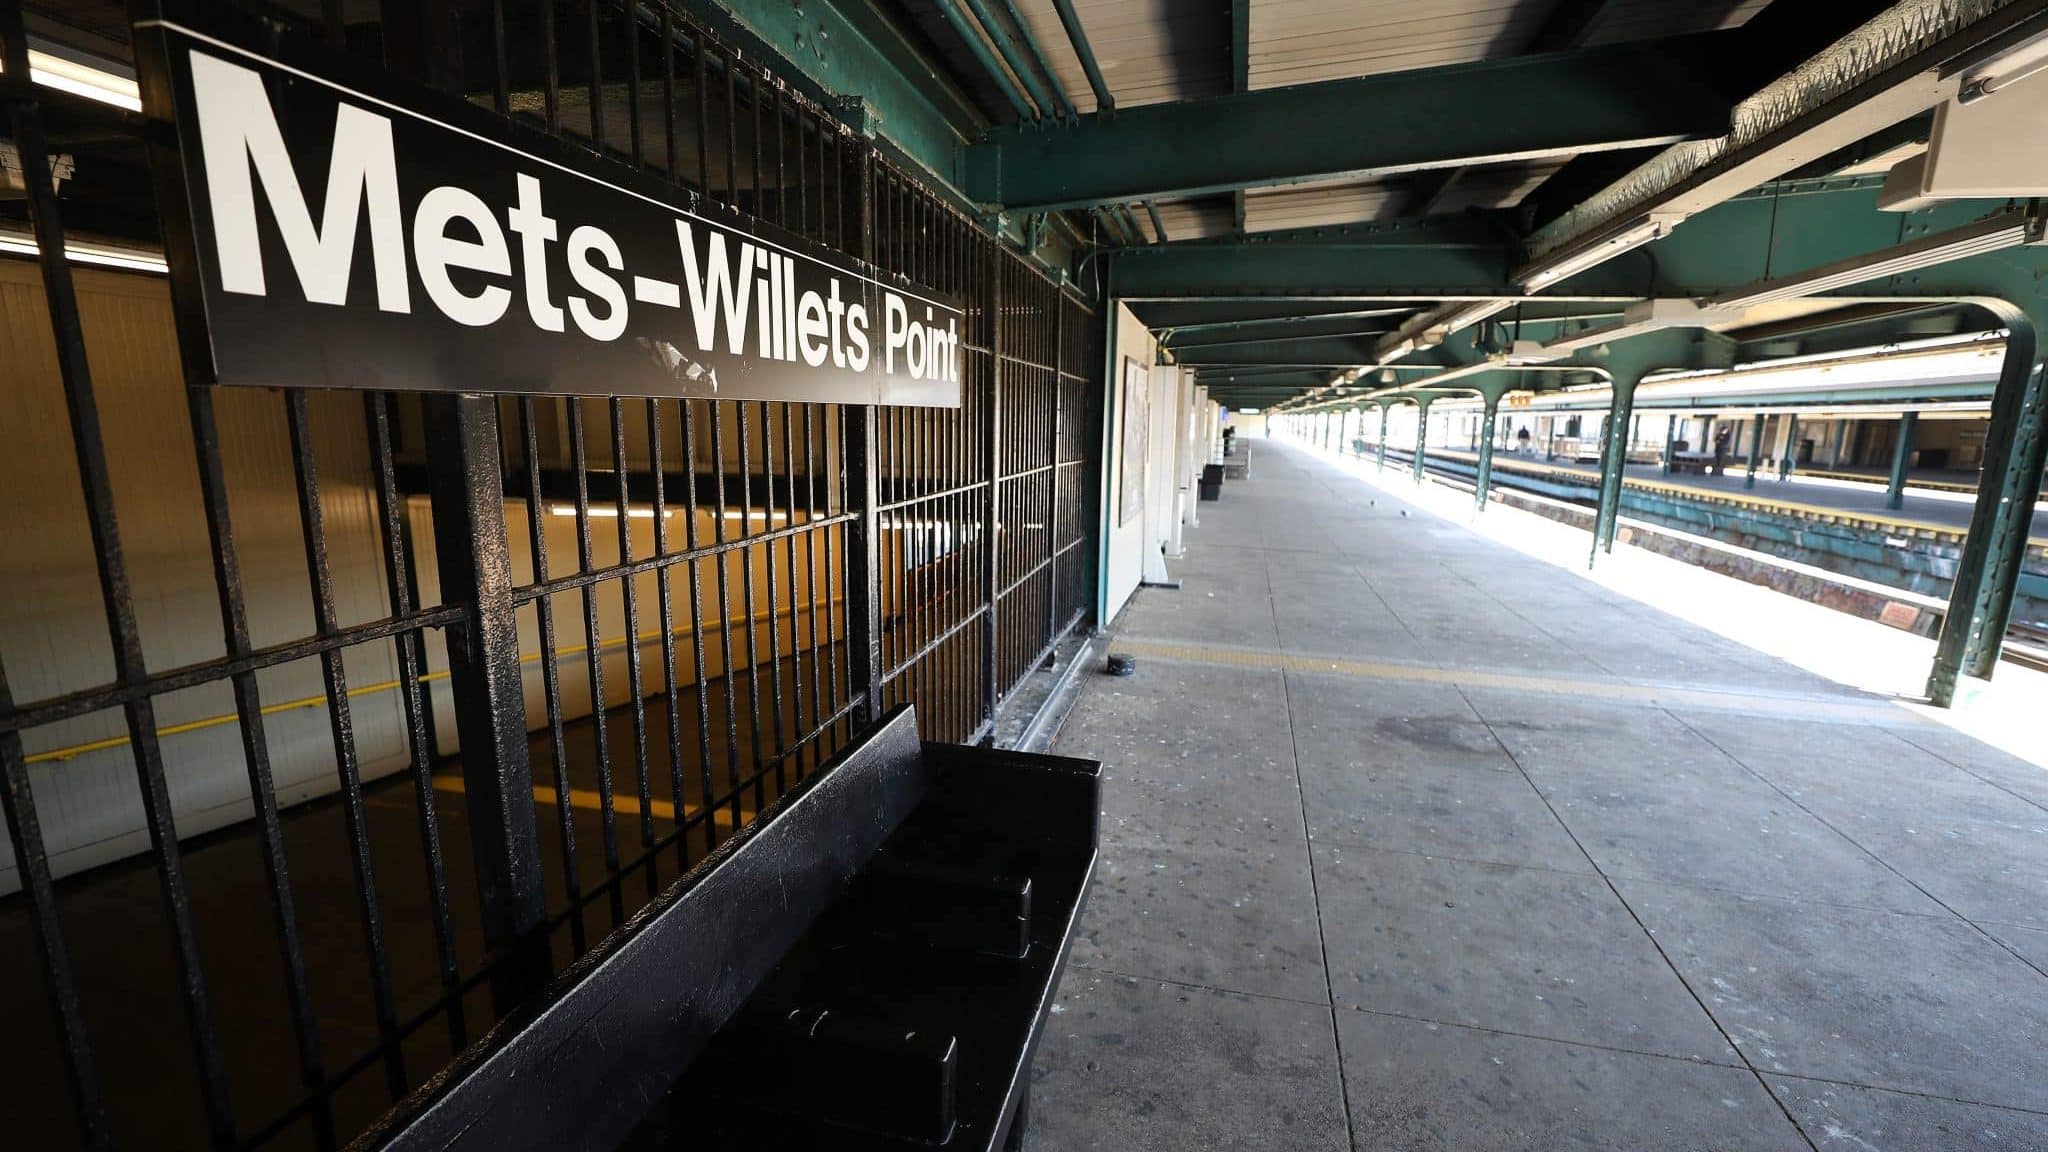 FLUSHING, NEW YORK - MARCH 26: The Subway stop platform to Citi Field remains empty on March 26, 2020. Citi Field is closed on the scheduled date for Opening Day March 26, 2020 in Flushing, New York. Major League Baseball has postponed the start of its season due to the coronavirus (COVID-19) outbreak and MLB commissioner Rob Manfred recently said the league is 